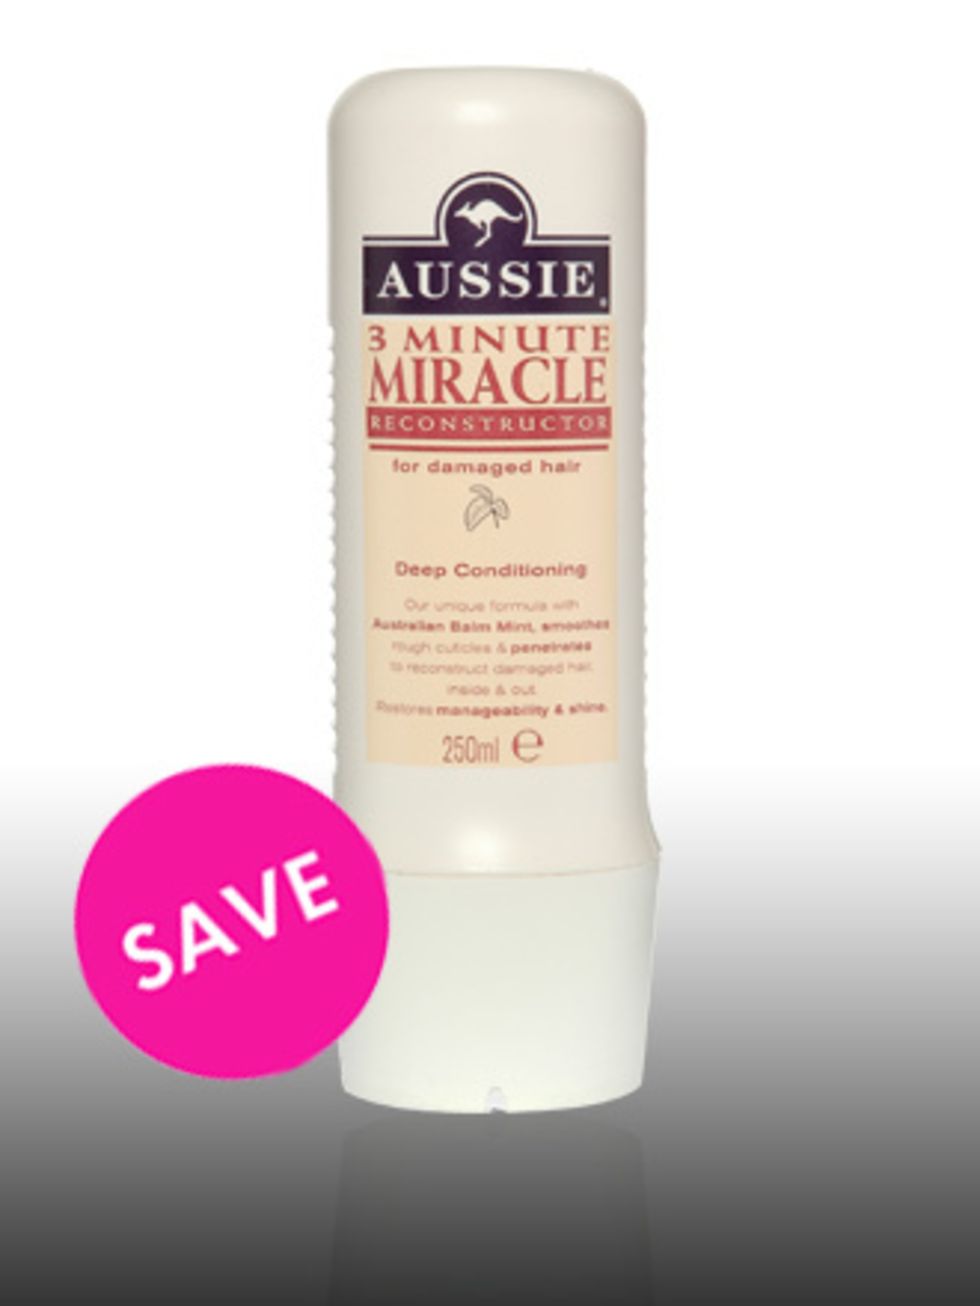 <p>3 Minute Miracle Reconstructor, £4.49 by Aussie at <a href="http://www.boots.com/shop/product_details.jsp?productid=1083055&amp;classificationid=1025729">Boots</a> </p><p>Give hair a first class boost on an economy budget with 3 Minute Miracle. It leav